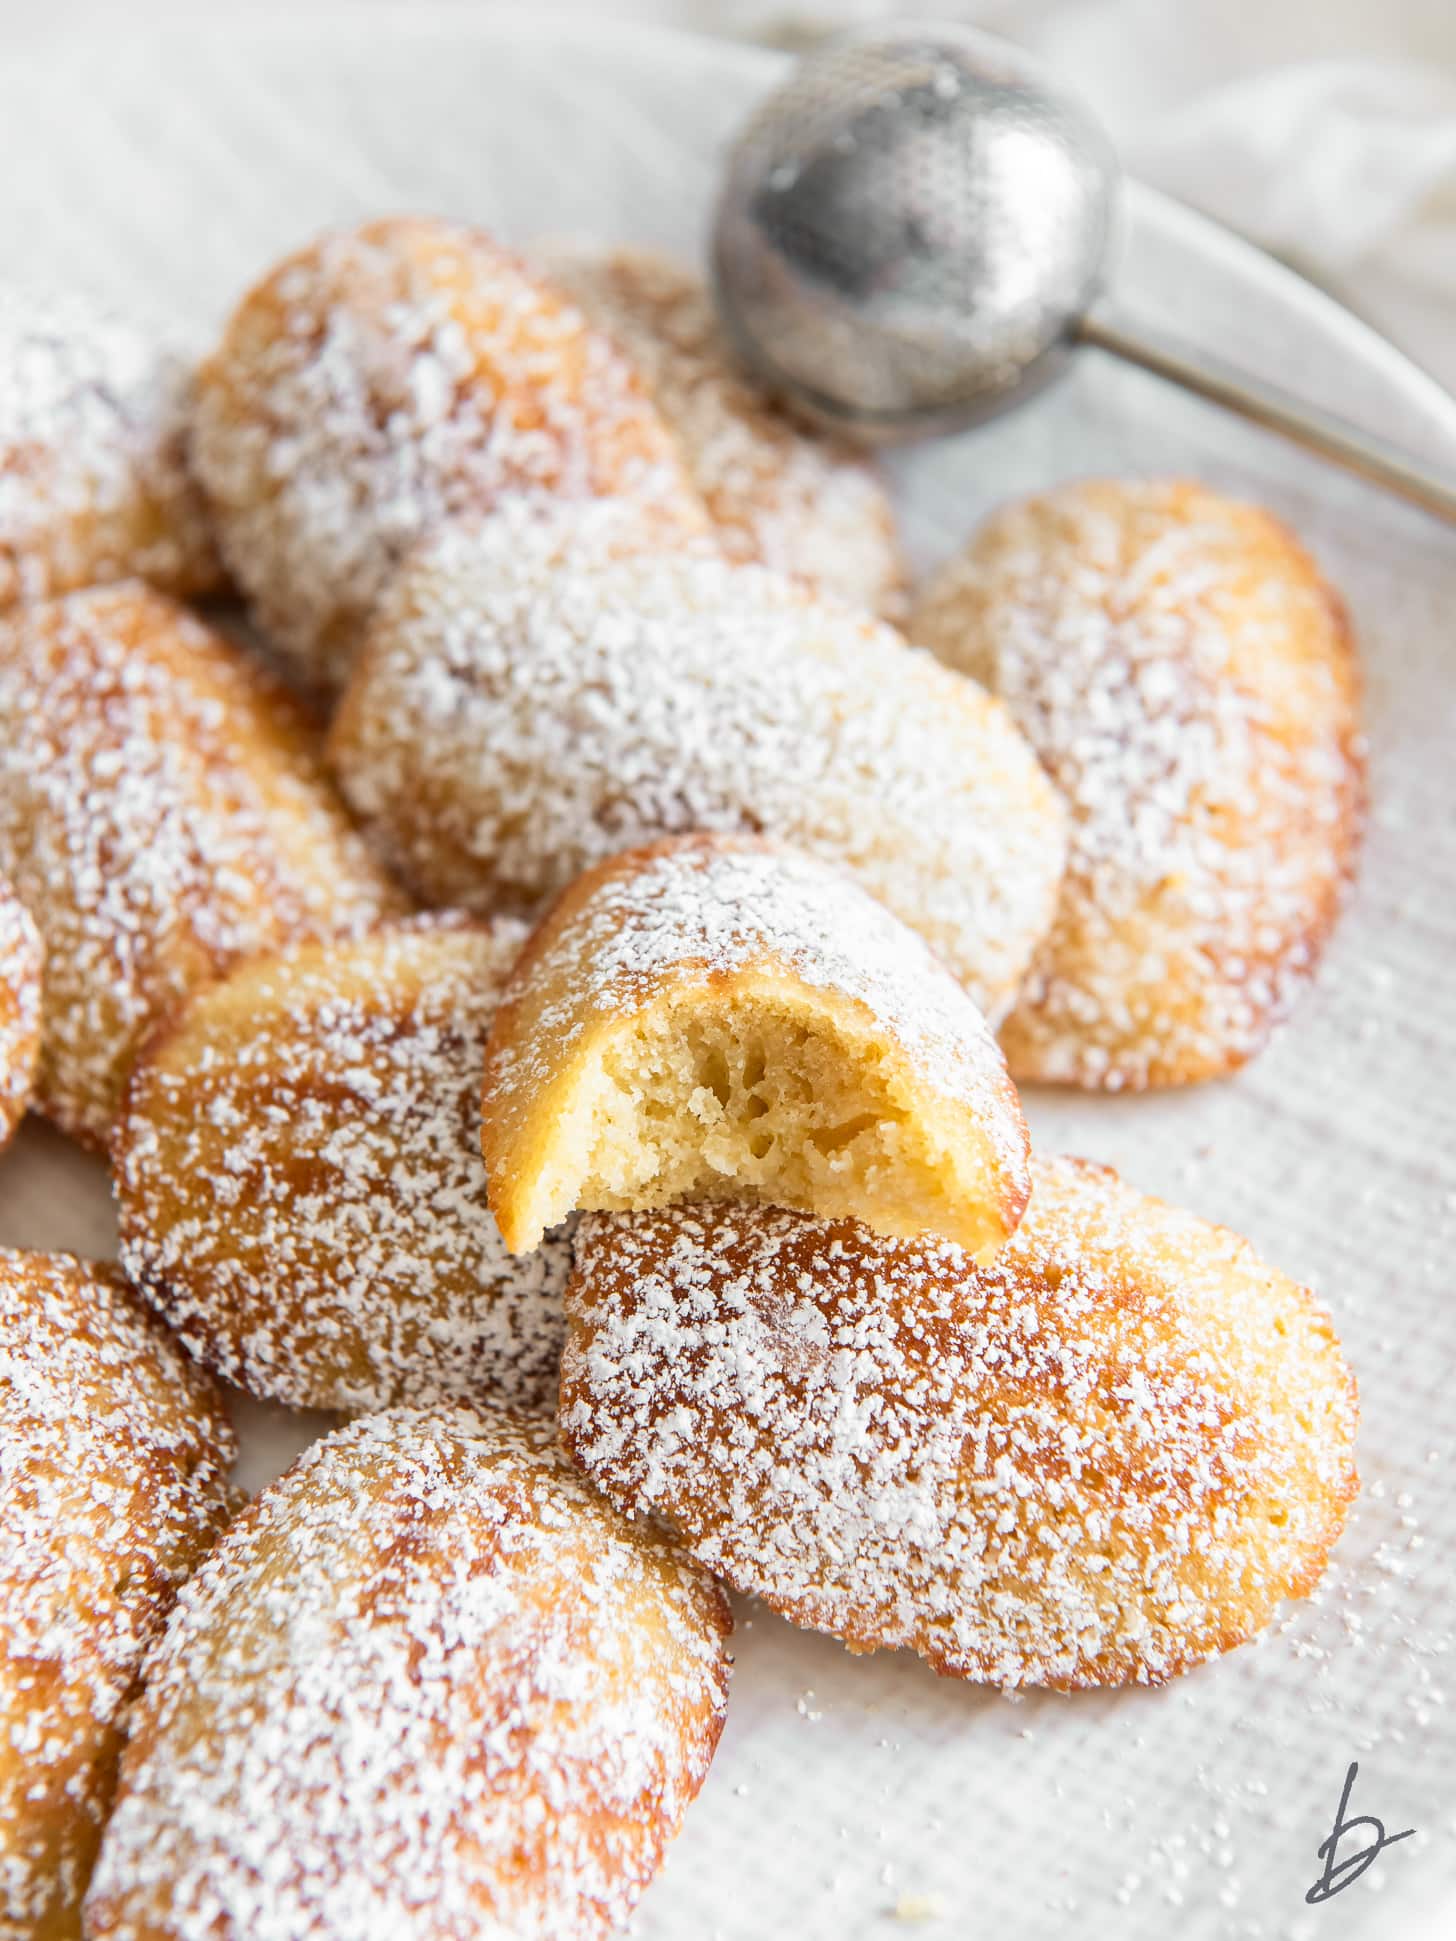 madeleine cookies on baking sheet with dusting of confectioners' sugar and lemon zest